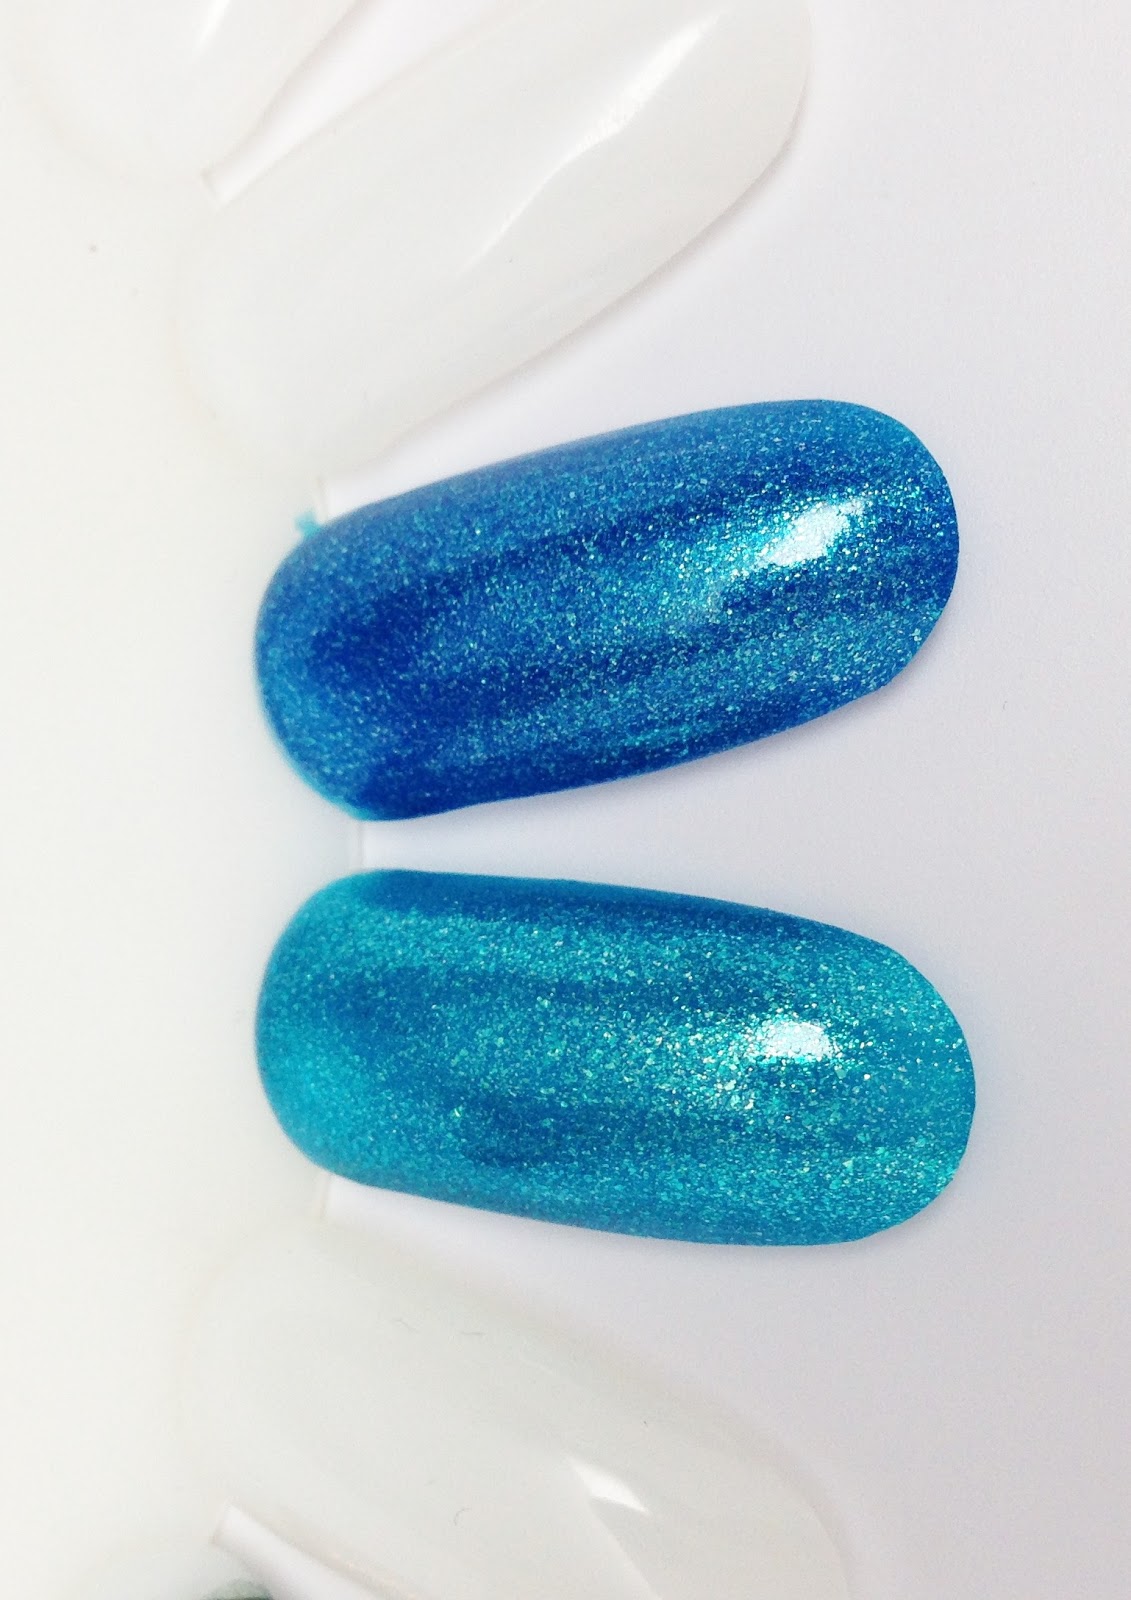 [OPI%2520The%2520Sky%2527s%2520The%2520Limit%2520%2528top%2529%2520vs%2520Catch%2520Me%2520In%2520Your%2520Net%2520%2528bottom%2529%255B3%255D.jpg]